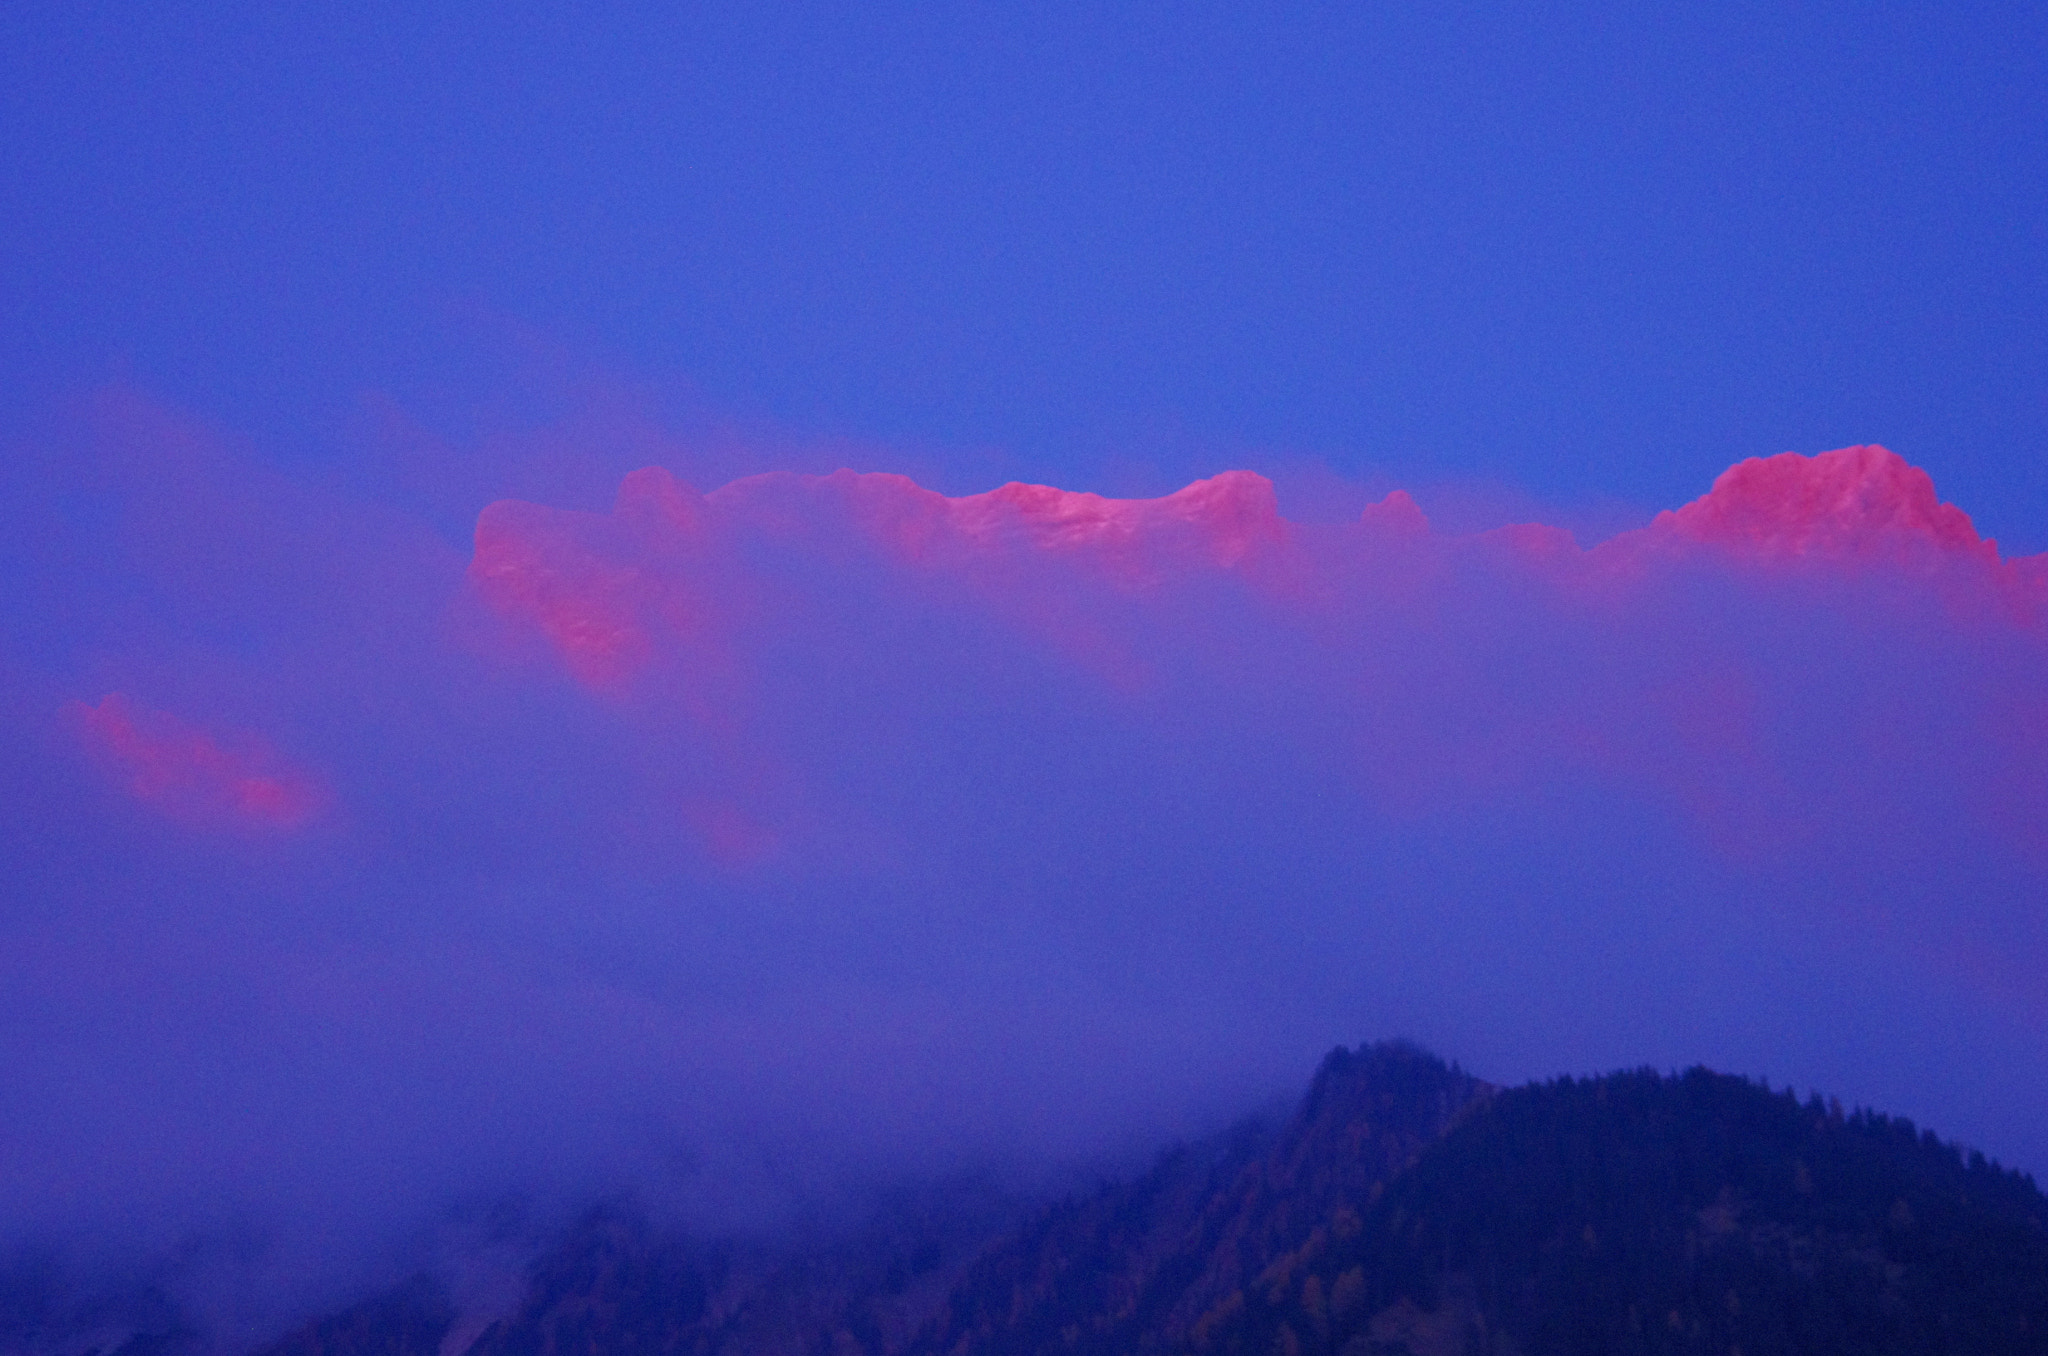 Pentax K-5 sample photo. Last sunlight - real colors! - wetterstein in the evening photography